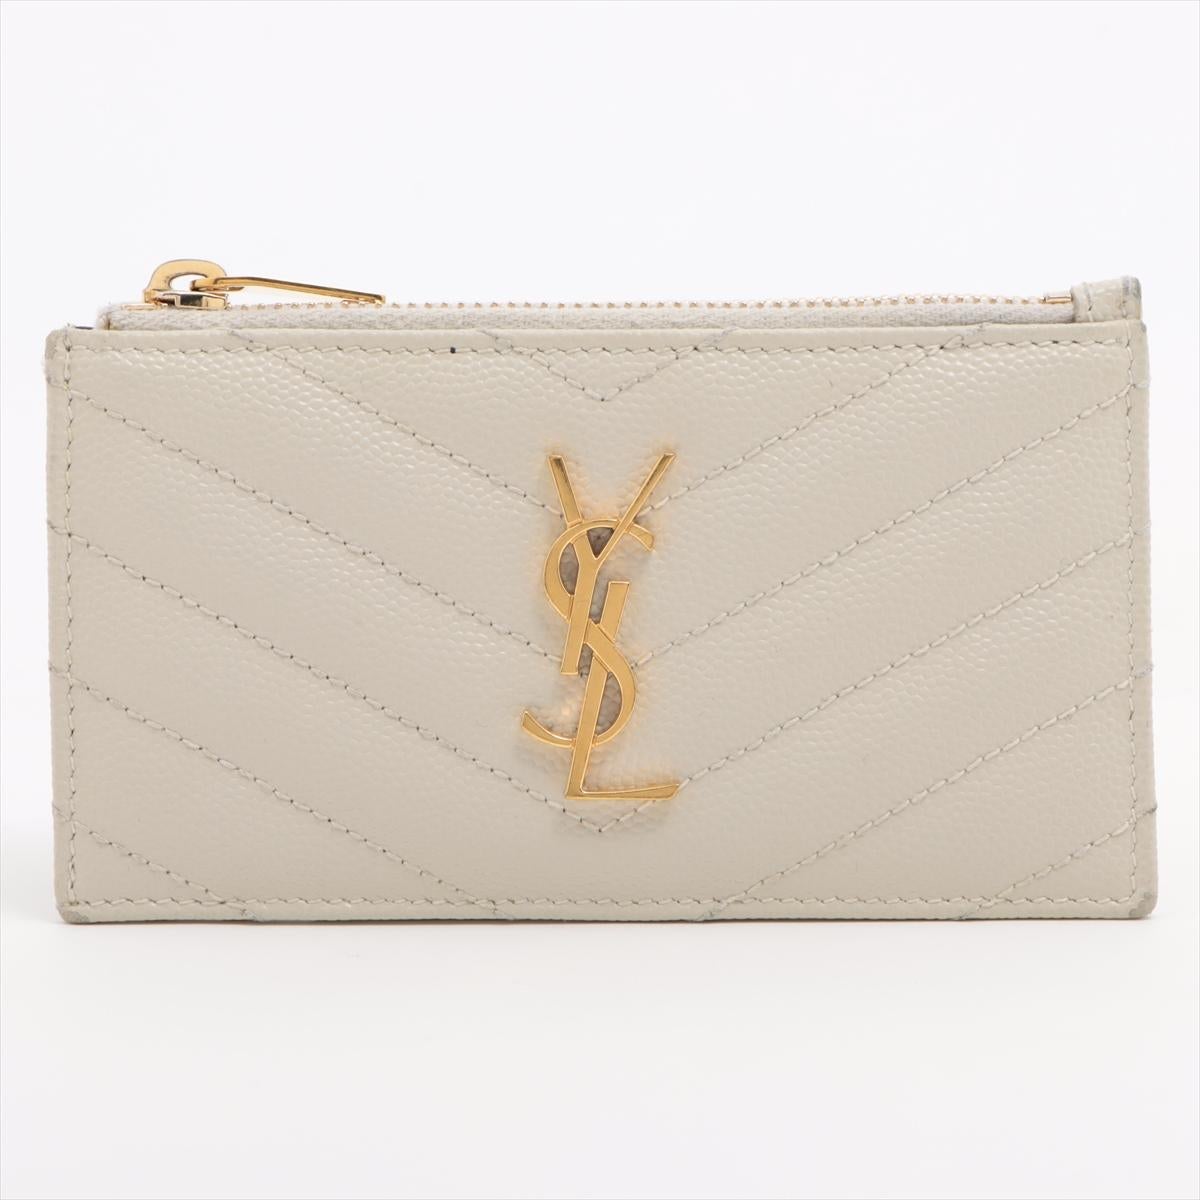 The Saint Laurent Paris V Stitch Leather Coin Card Case in White is a stylish and practical accessory that combines elegance with functionality. Crafted from high-quality leather, the coin card case showcases Saint Laurent's signature craftsmanship